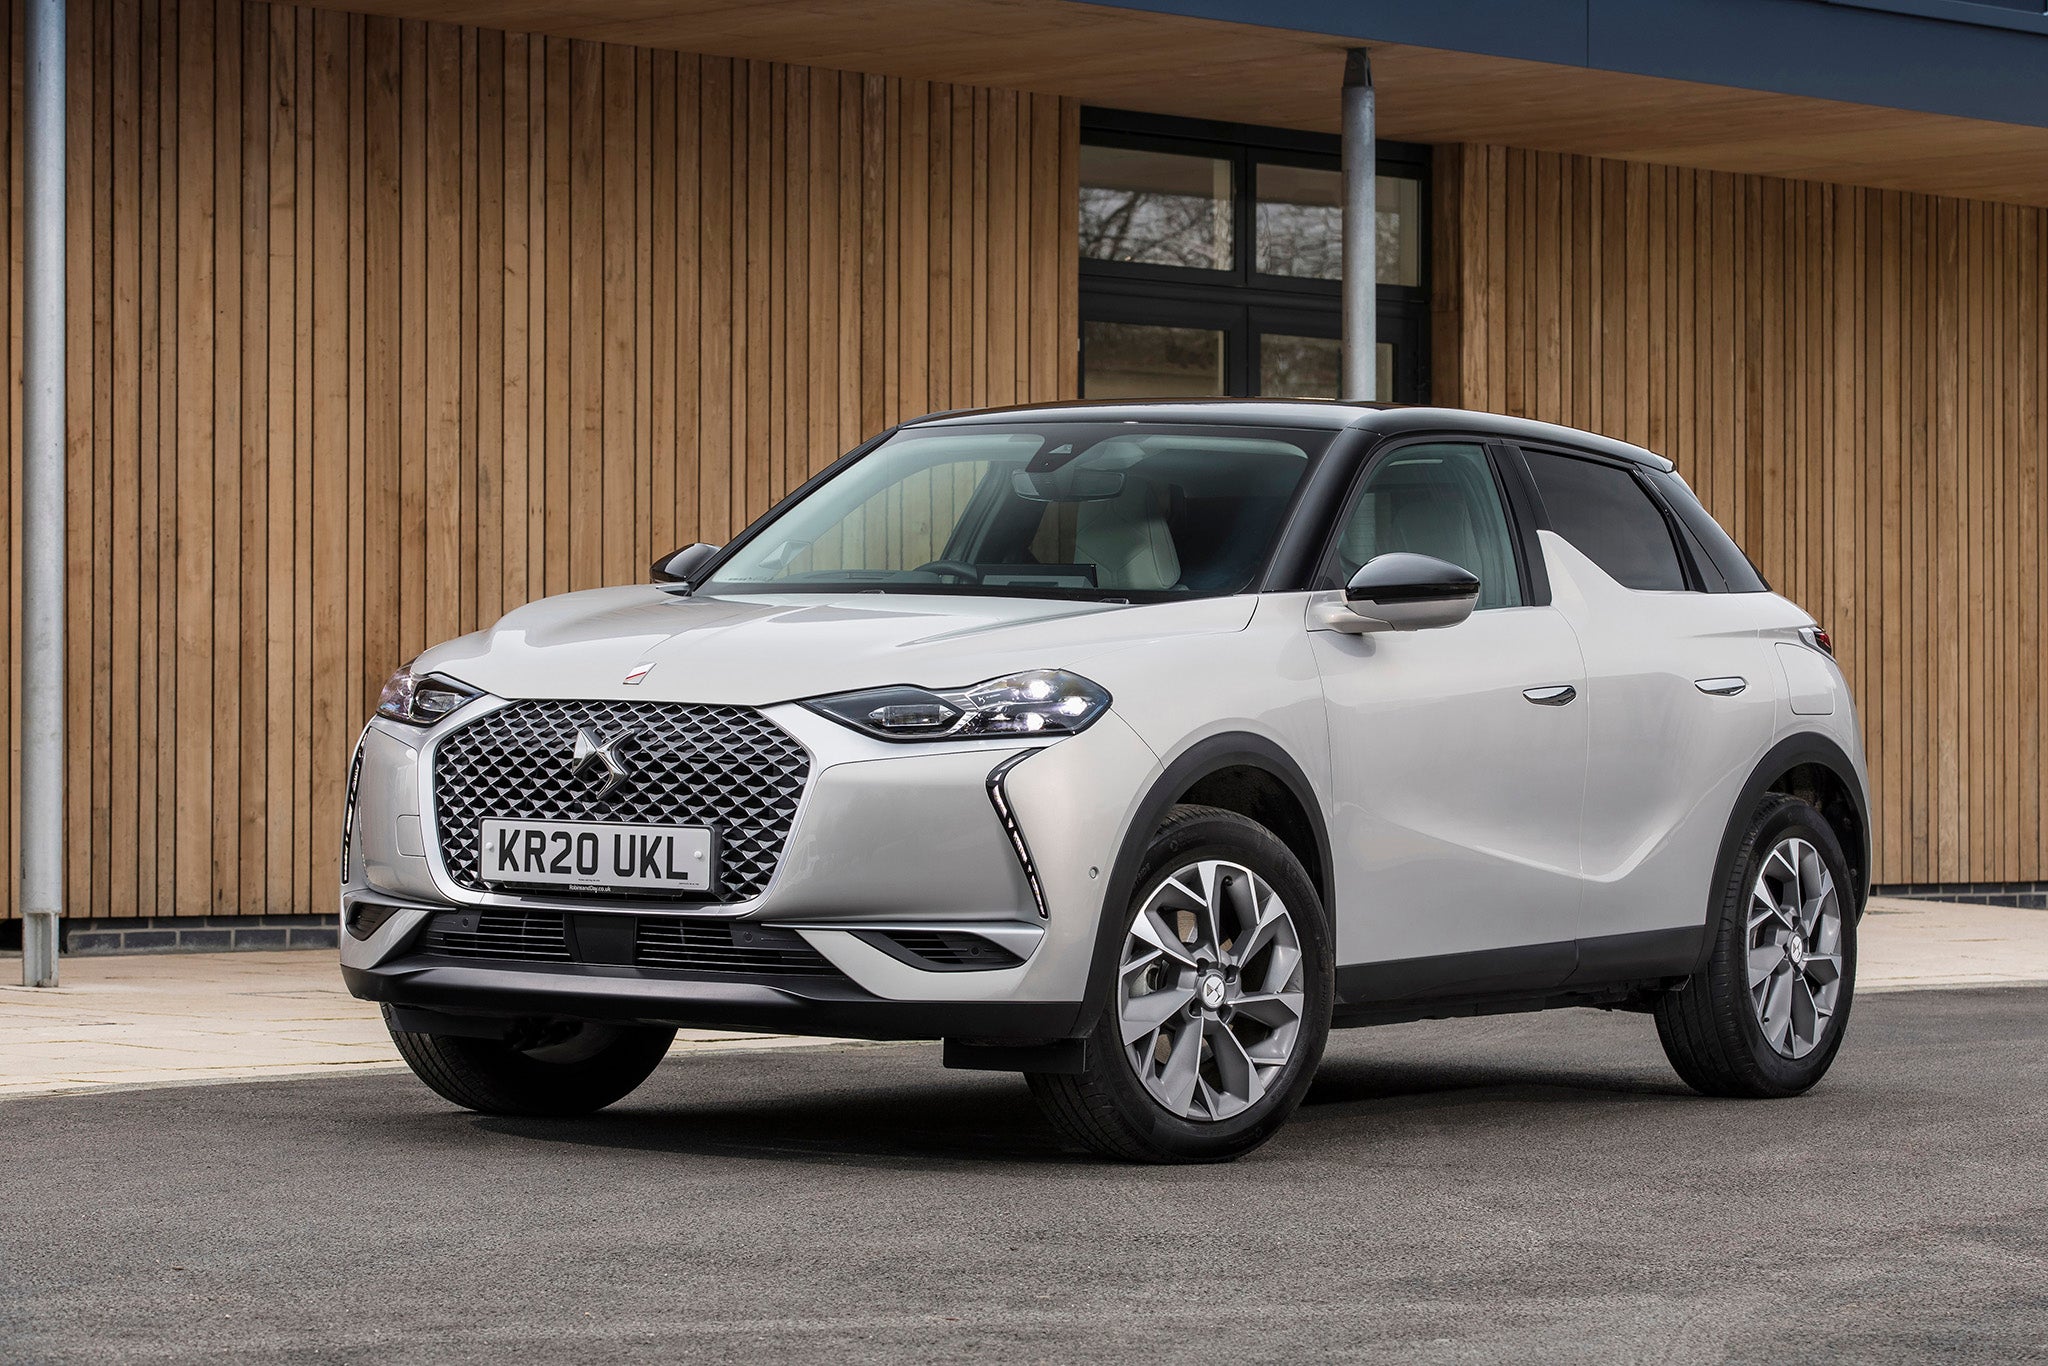 The DS 3 Crossback is reasonably class competitive, and that 130-miles-plus range should be enough for most users